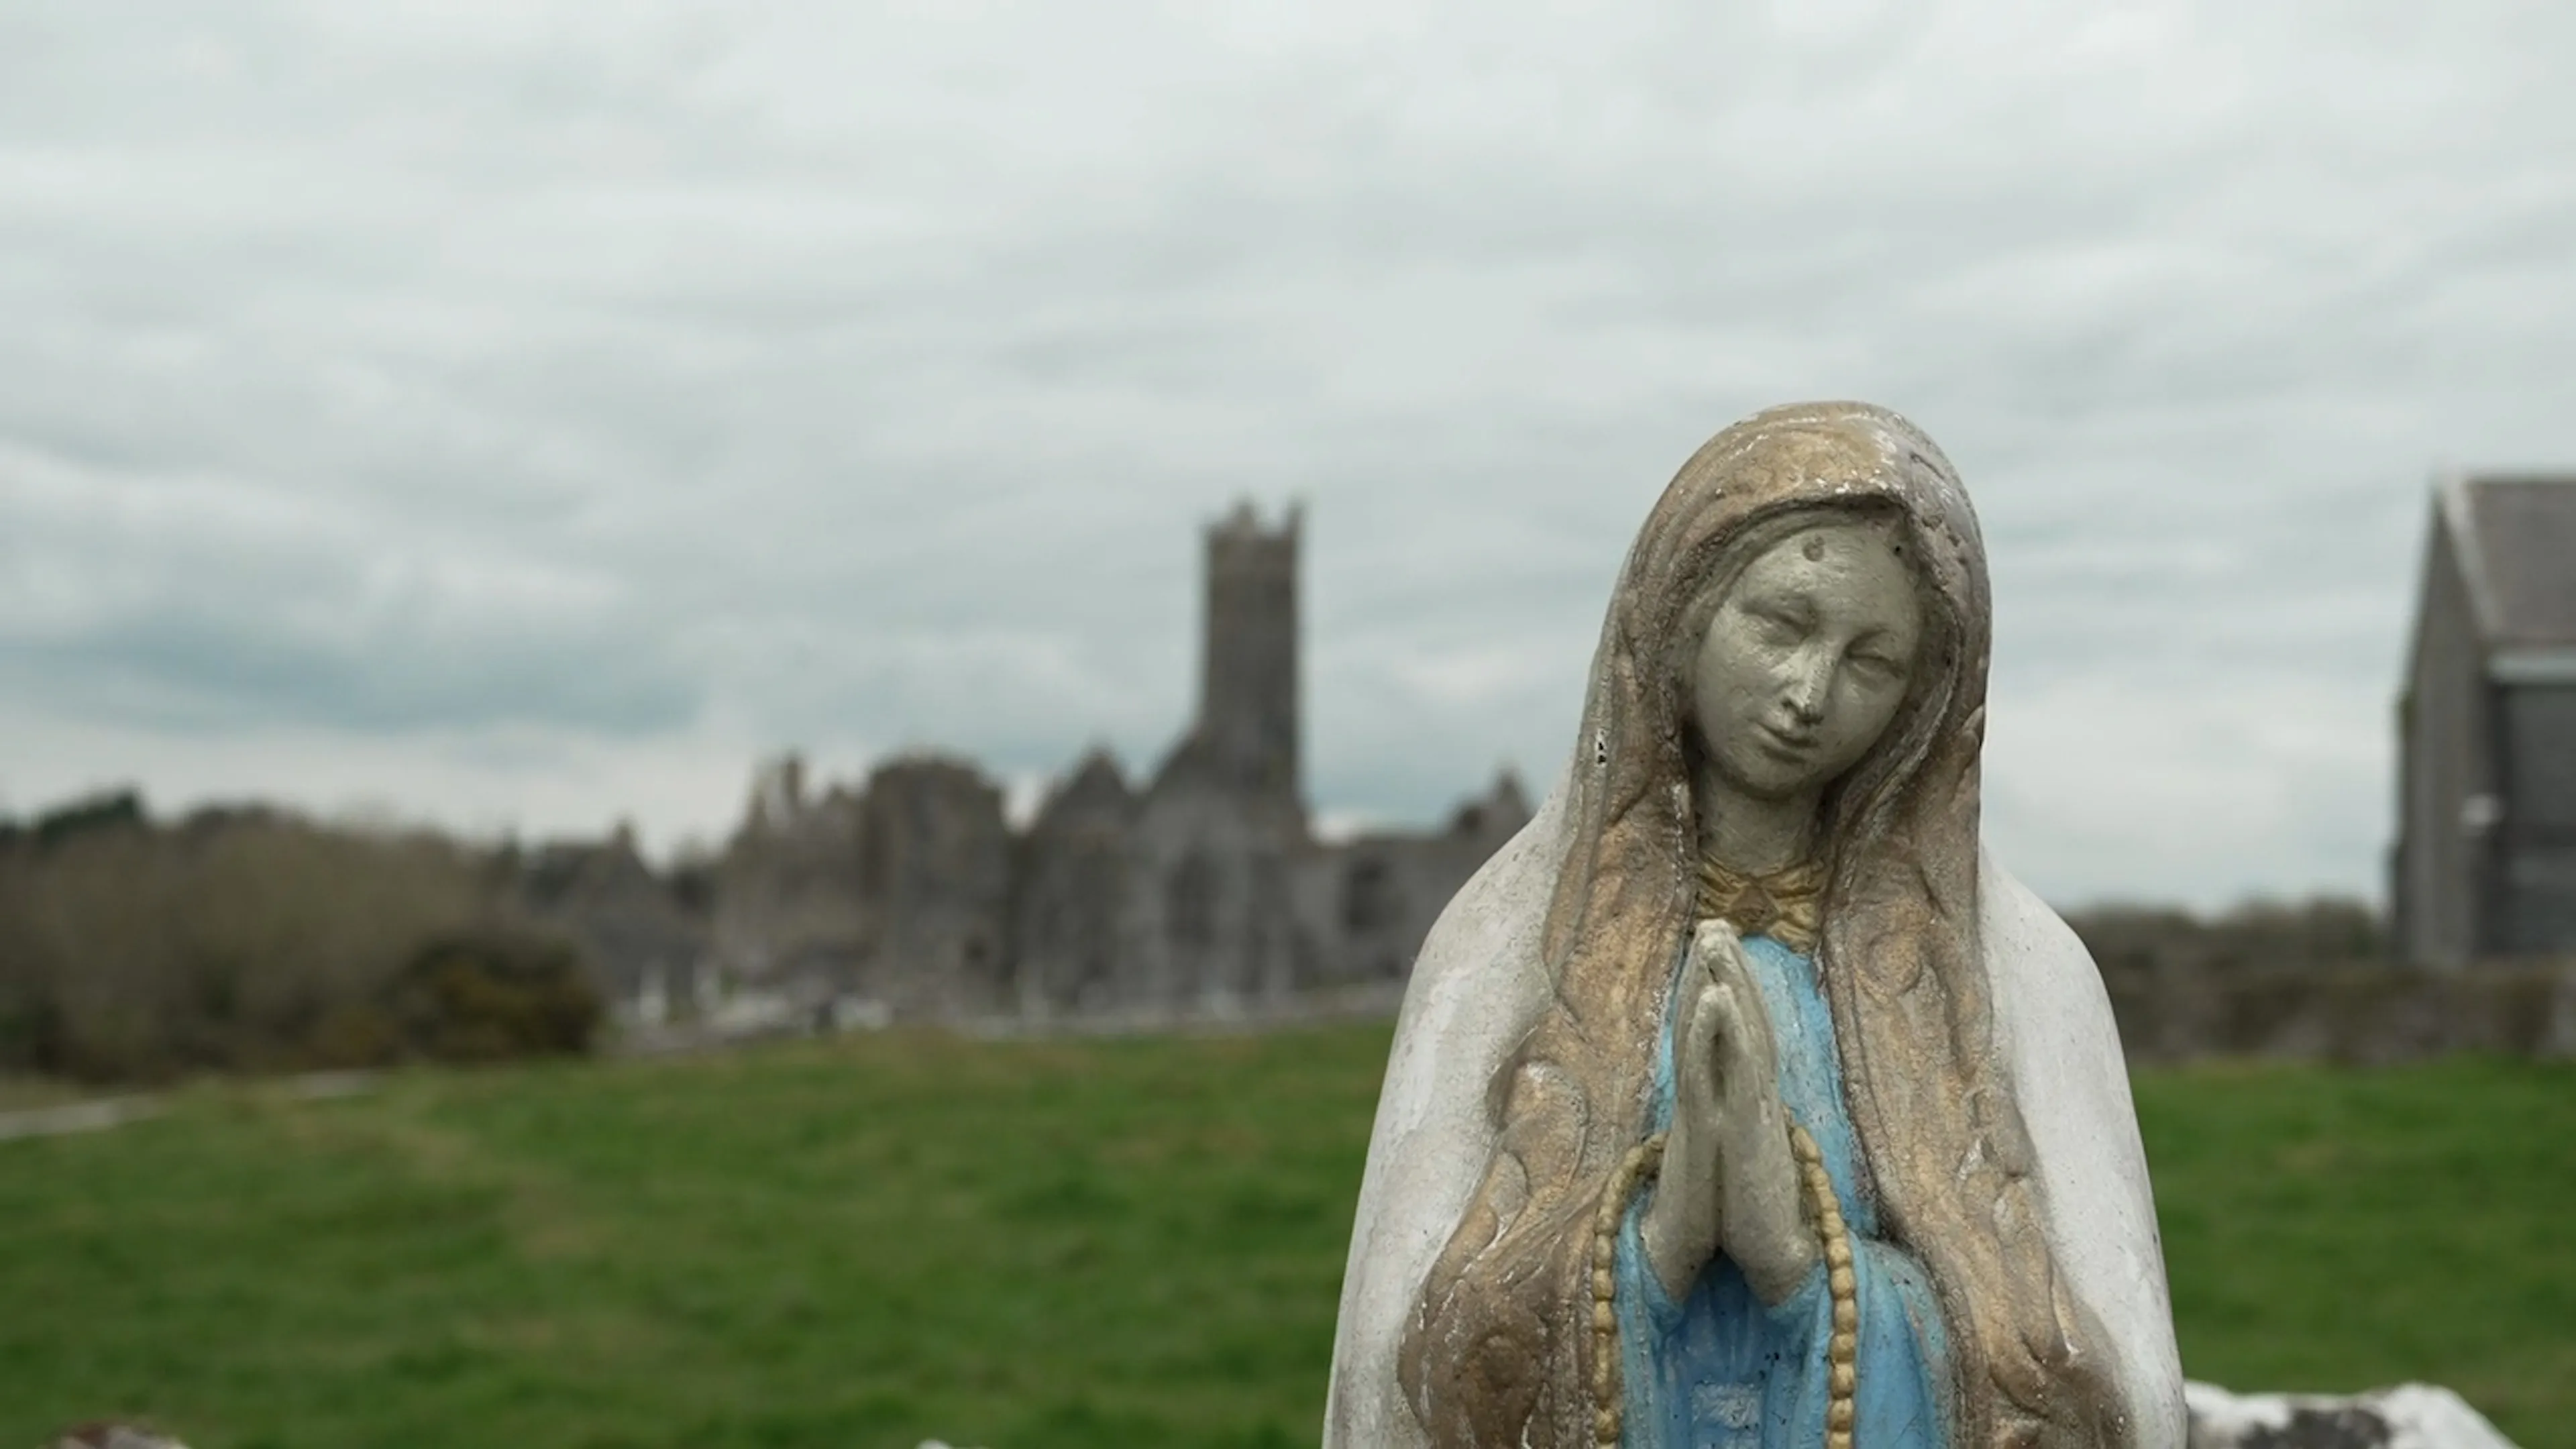 A statue of the Virgin Mary on the grounds of the 15th-century Quin Abbey in County Clare, Ireland.?w=200&h=150